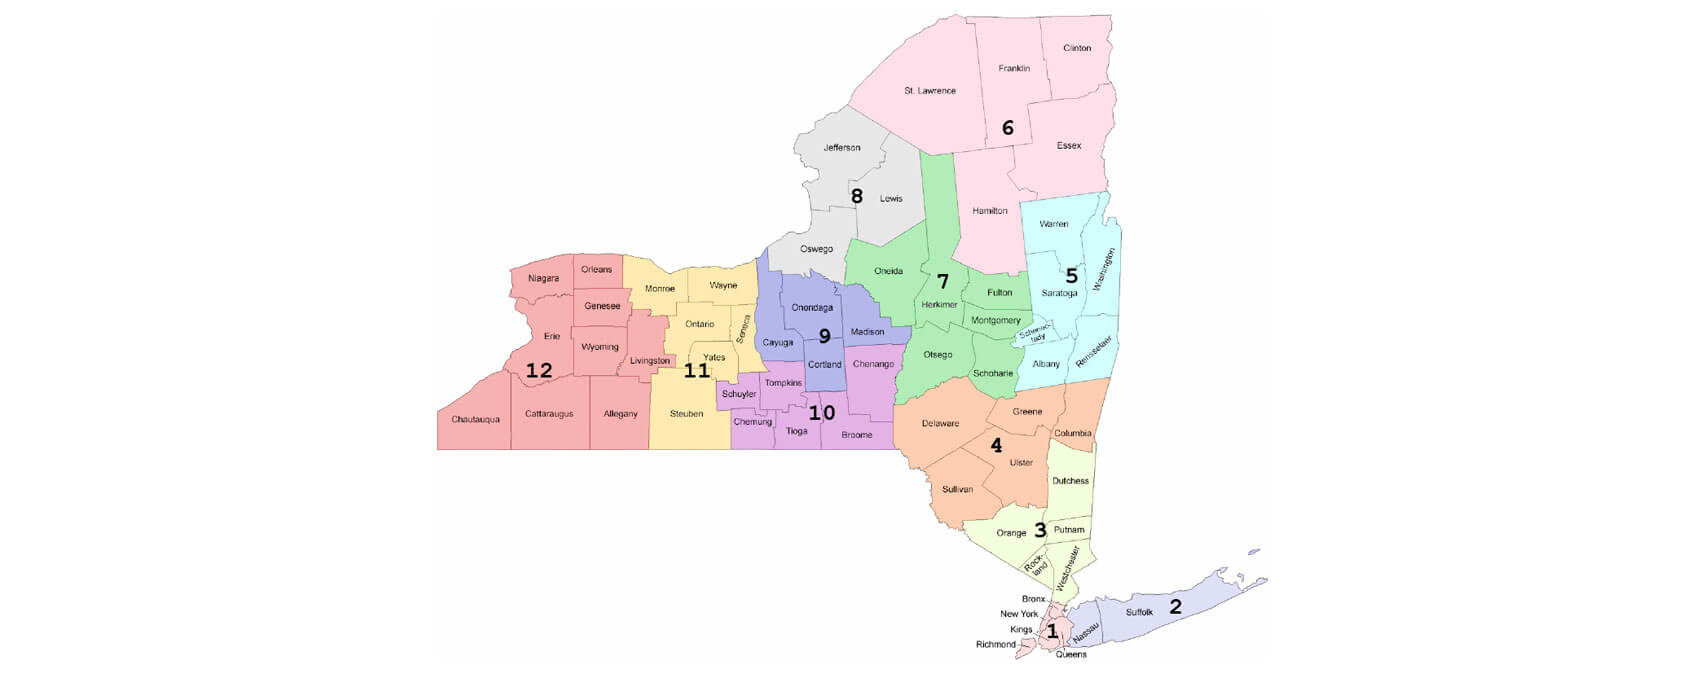 A map of New York State showing the regions for Grant schedules